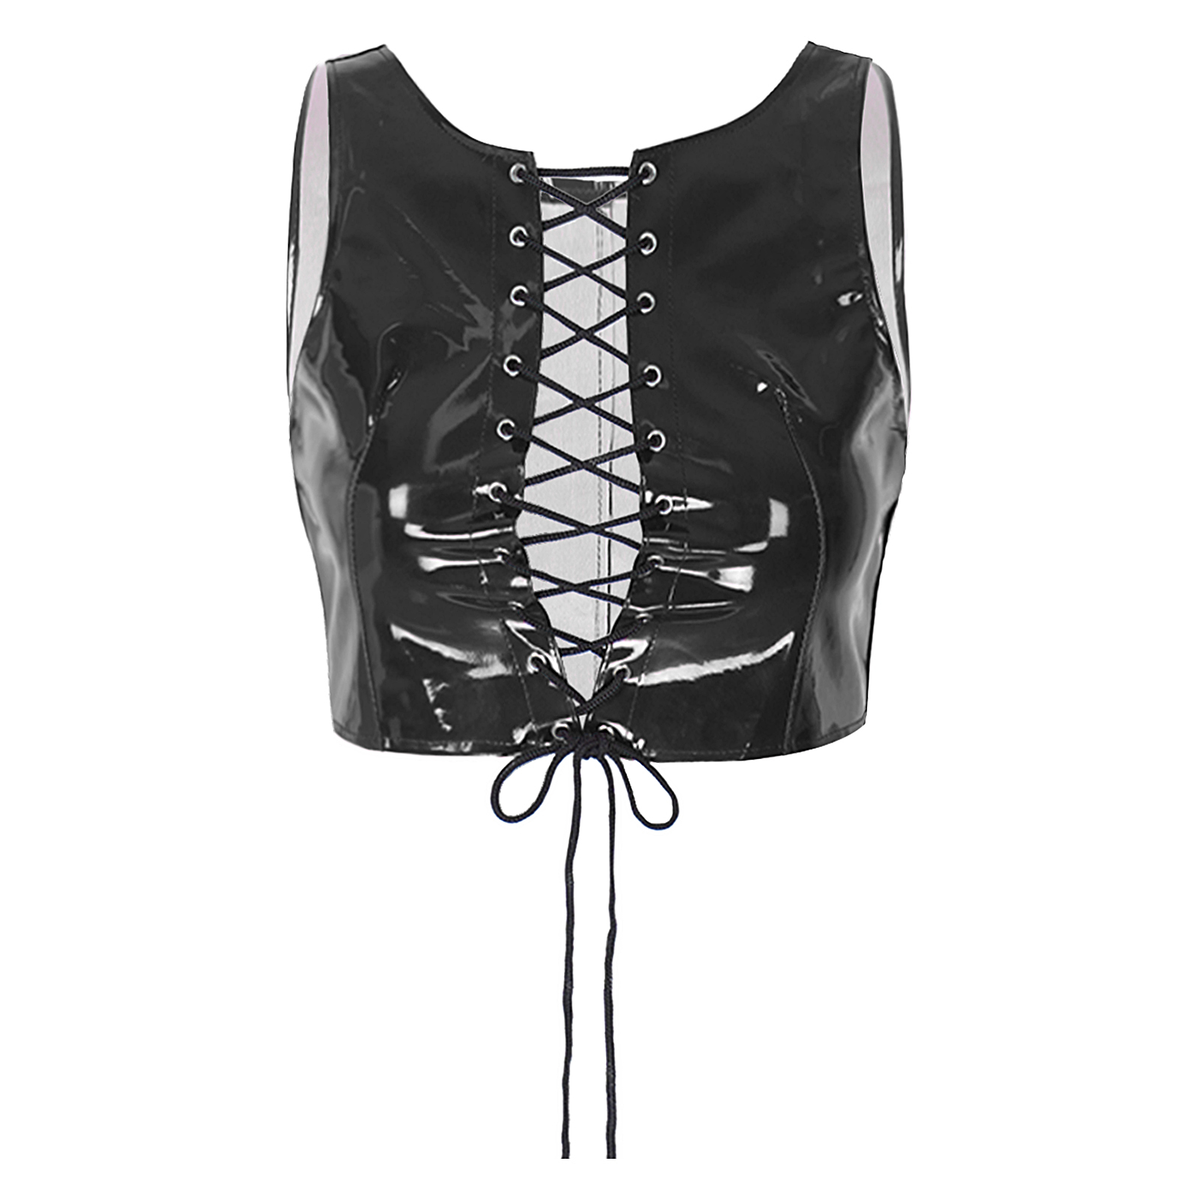 Erotic Ladies Latex Crop Top with Lace-up / Wetlook Patent Leather Corset / Sexy Vest Tank - EVE's SECRETS